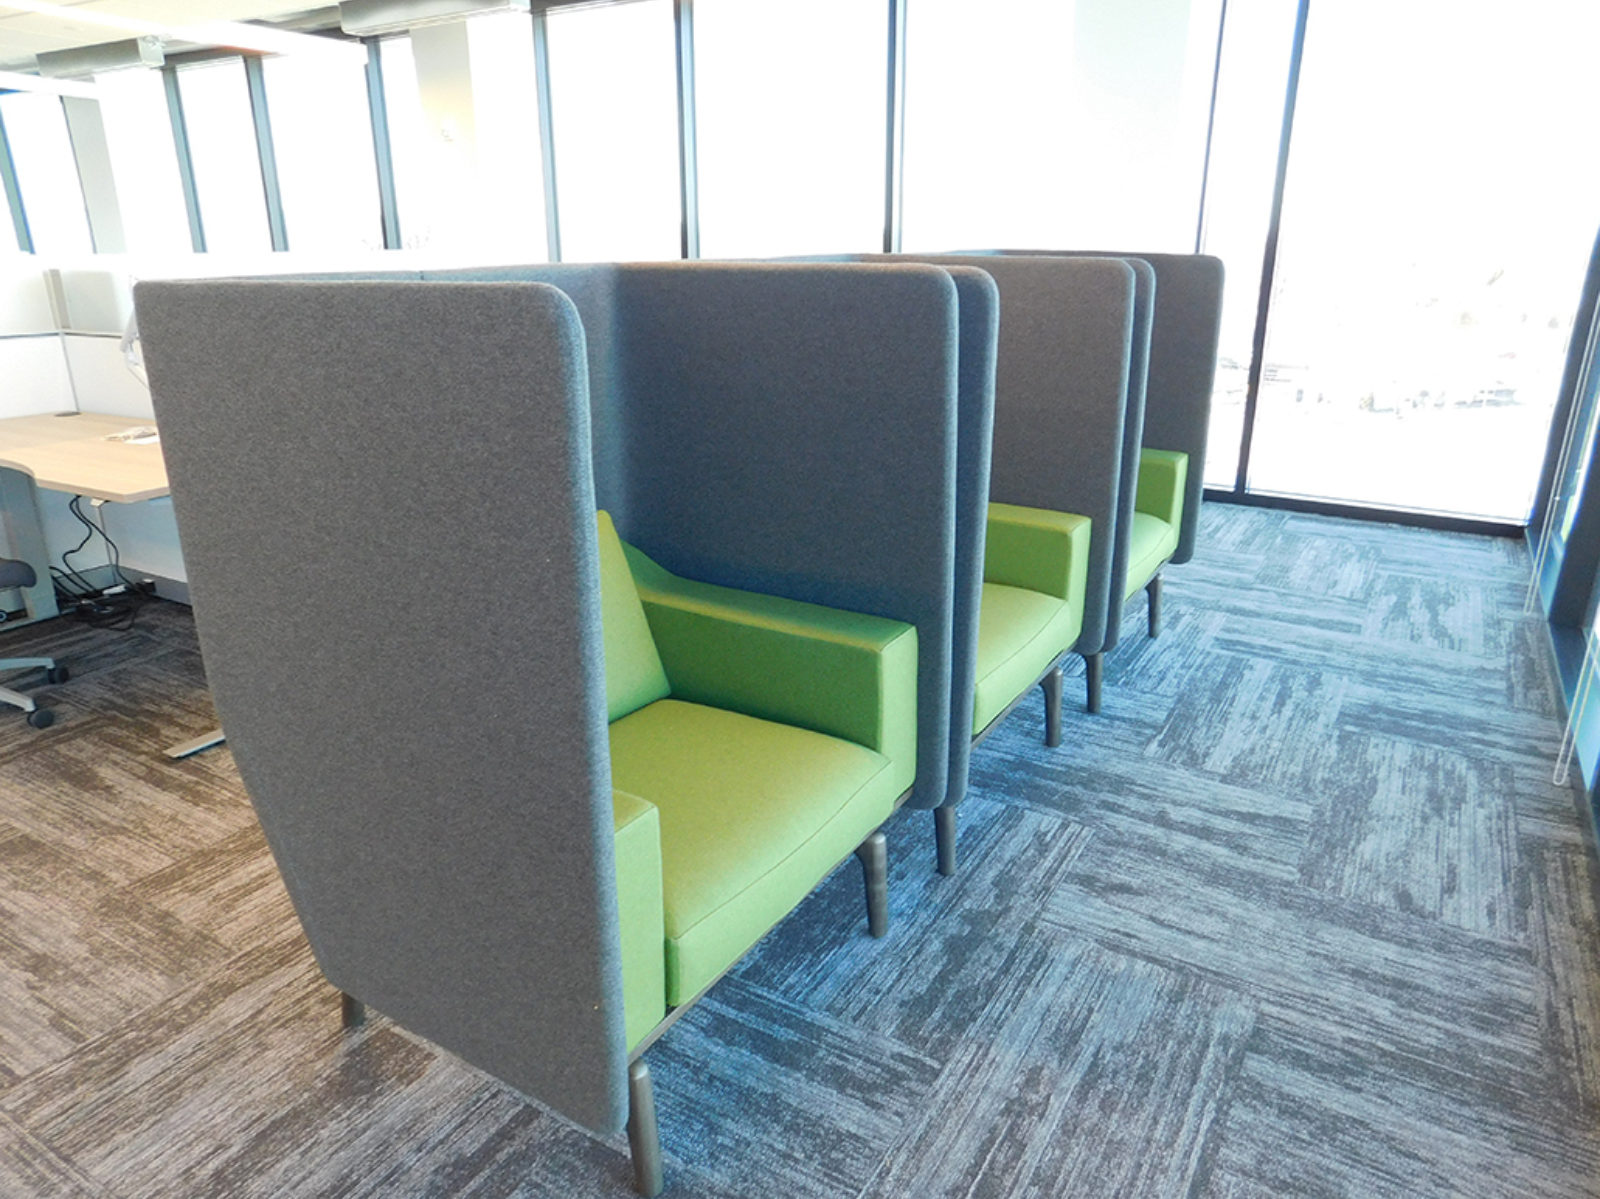 Set of three privacy lounge seating with green seats and grey screens